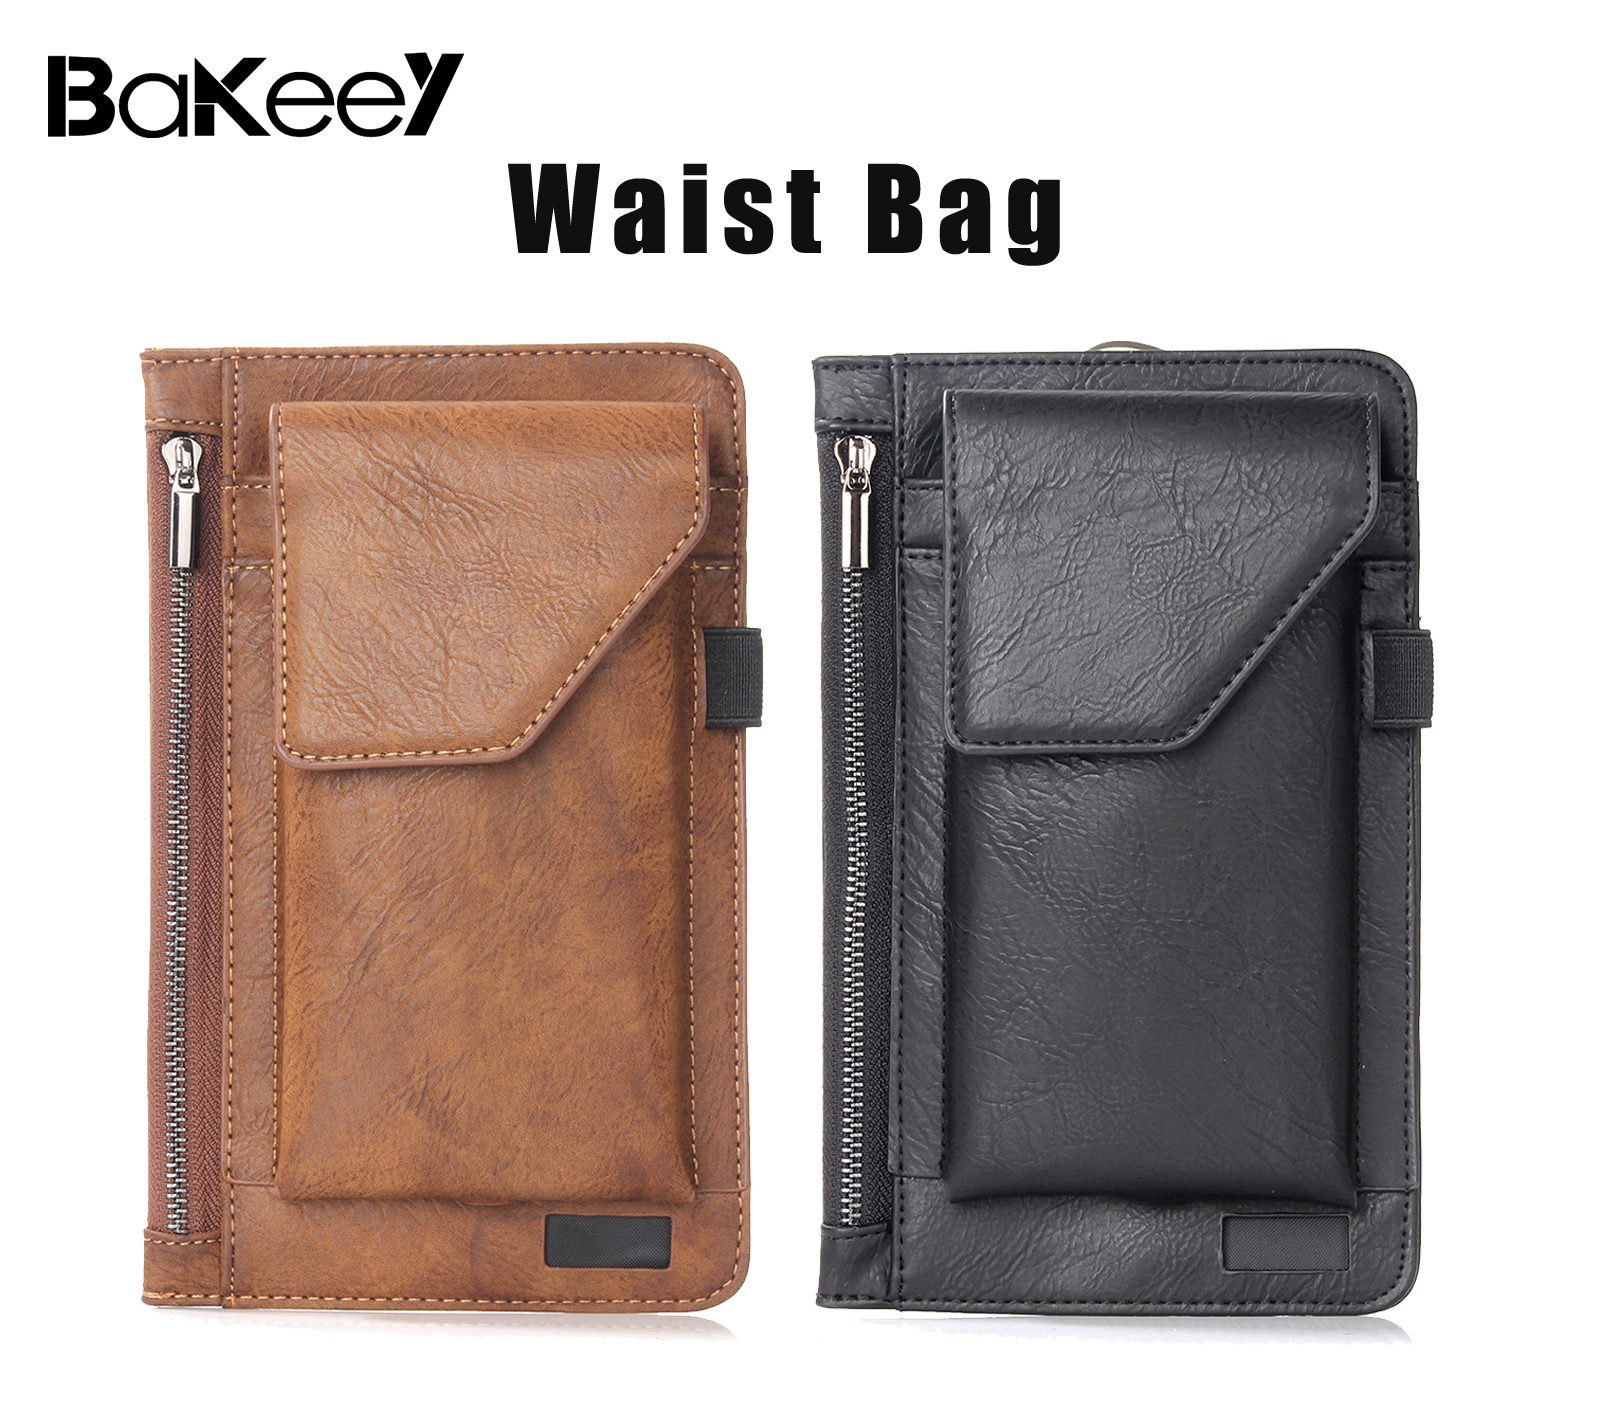 Bakeey-Casual-Vintage-Bussiness-Multi-Pocket-Reserve-Charging-Port-PU-Leather-Mobile-Phone-Money-Hik-1692248-1